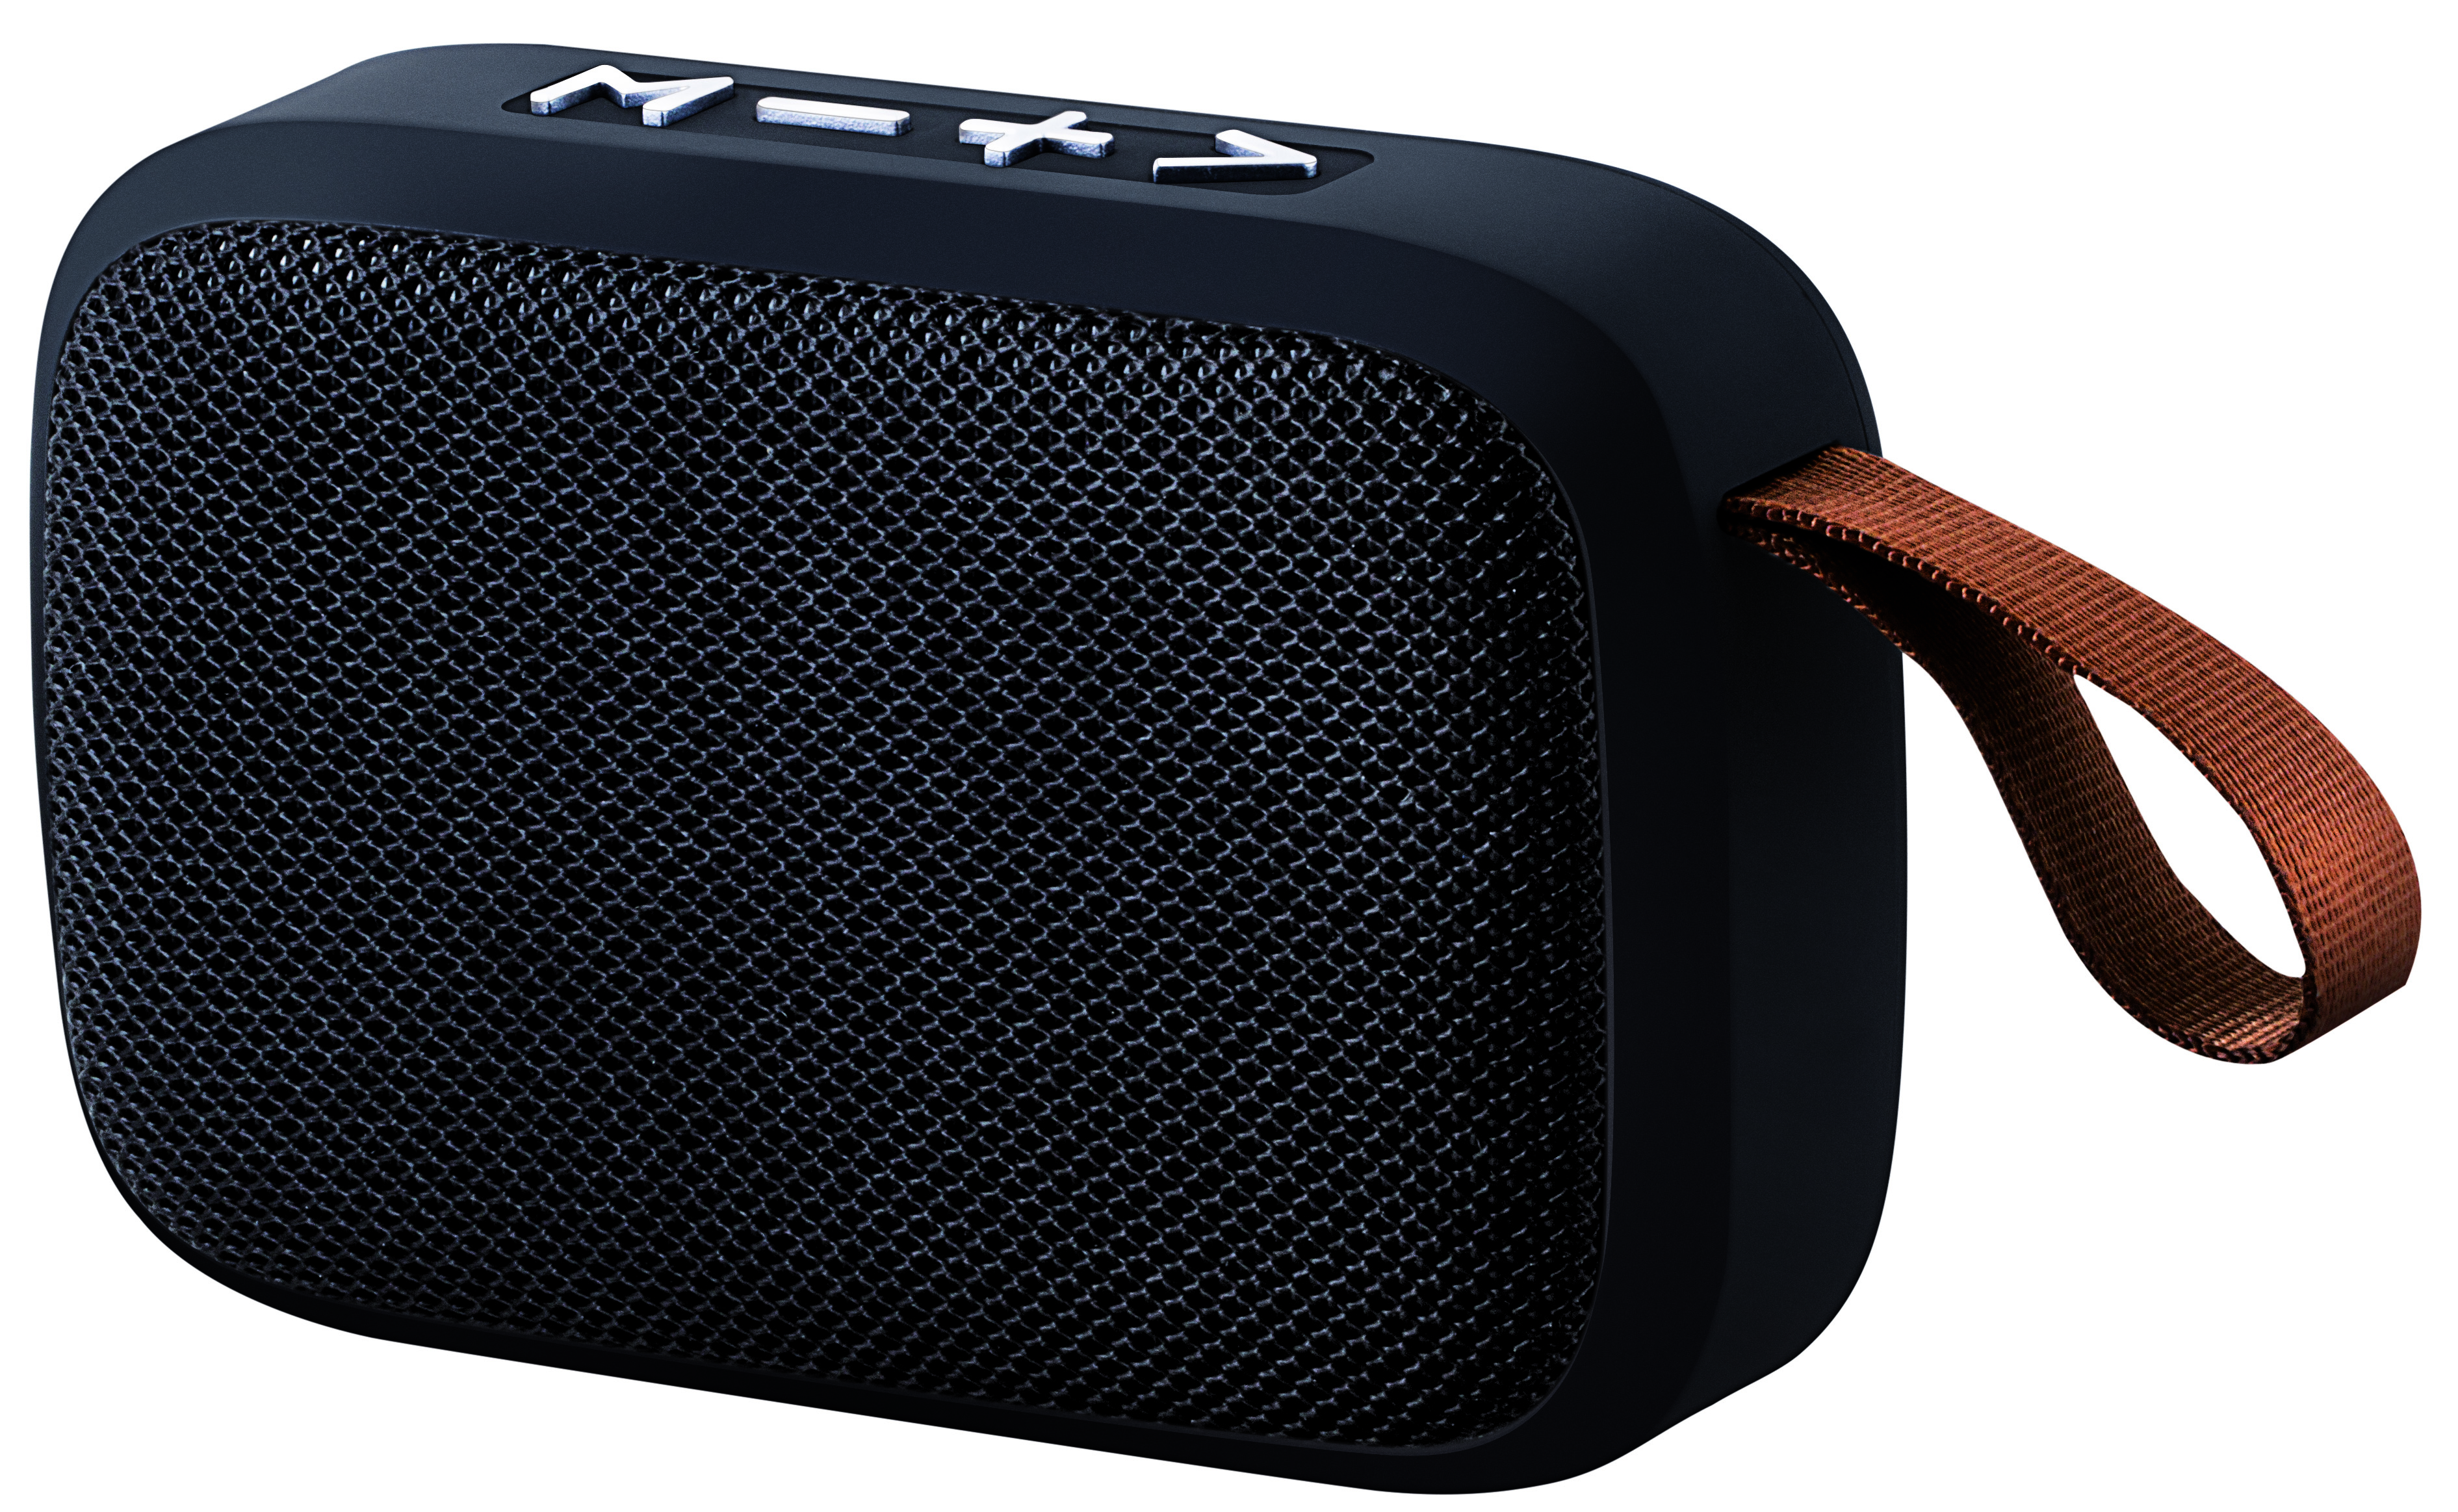 Sign Wireless speaker with radio and SD card slot